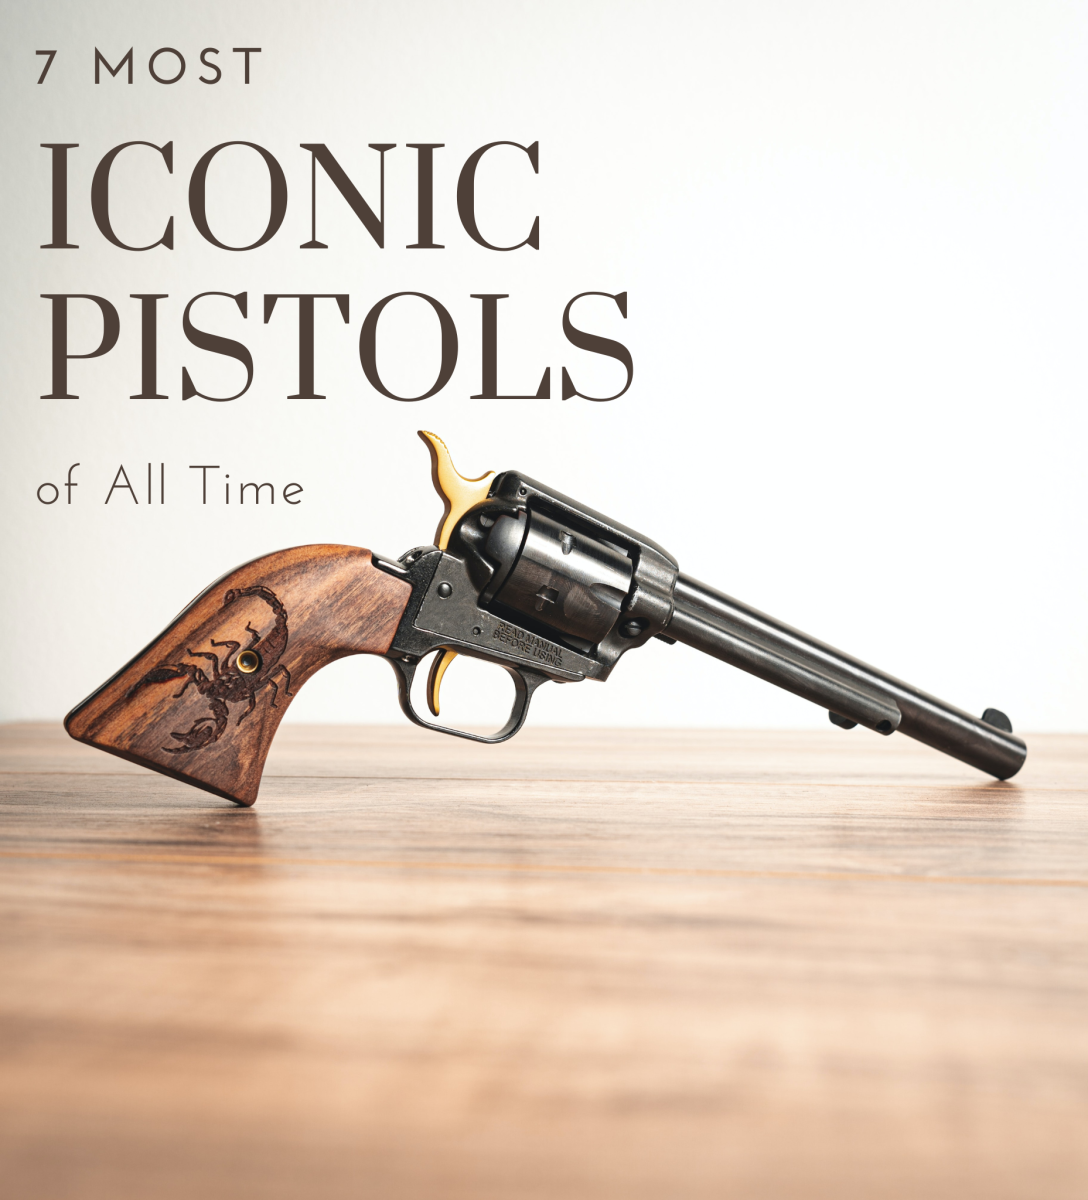 7 Most Iconic Pistols of All Time